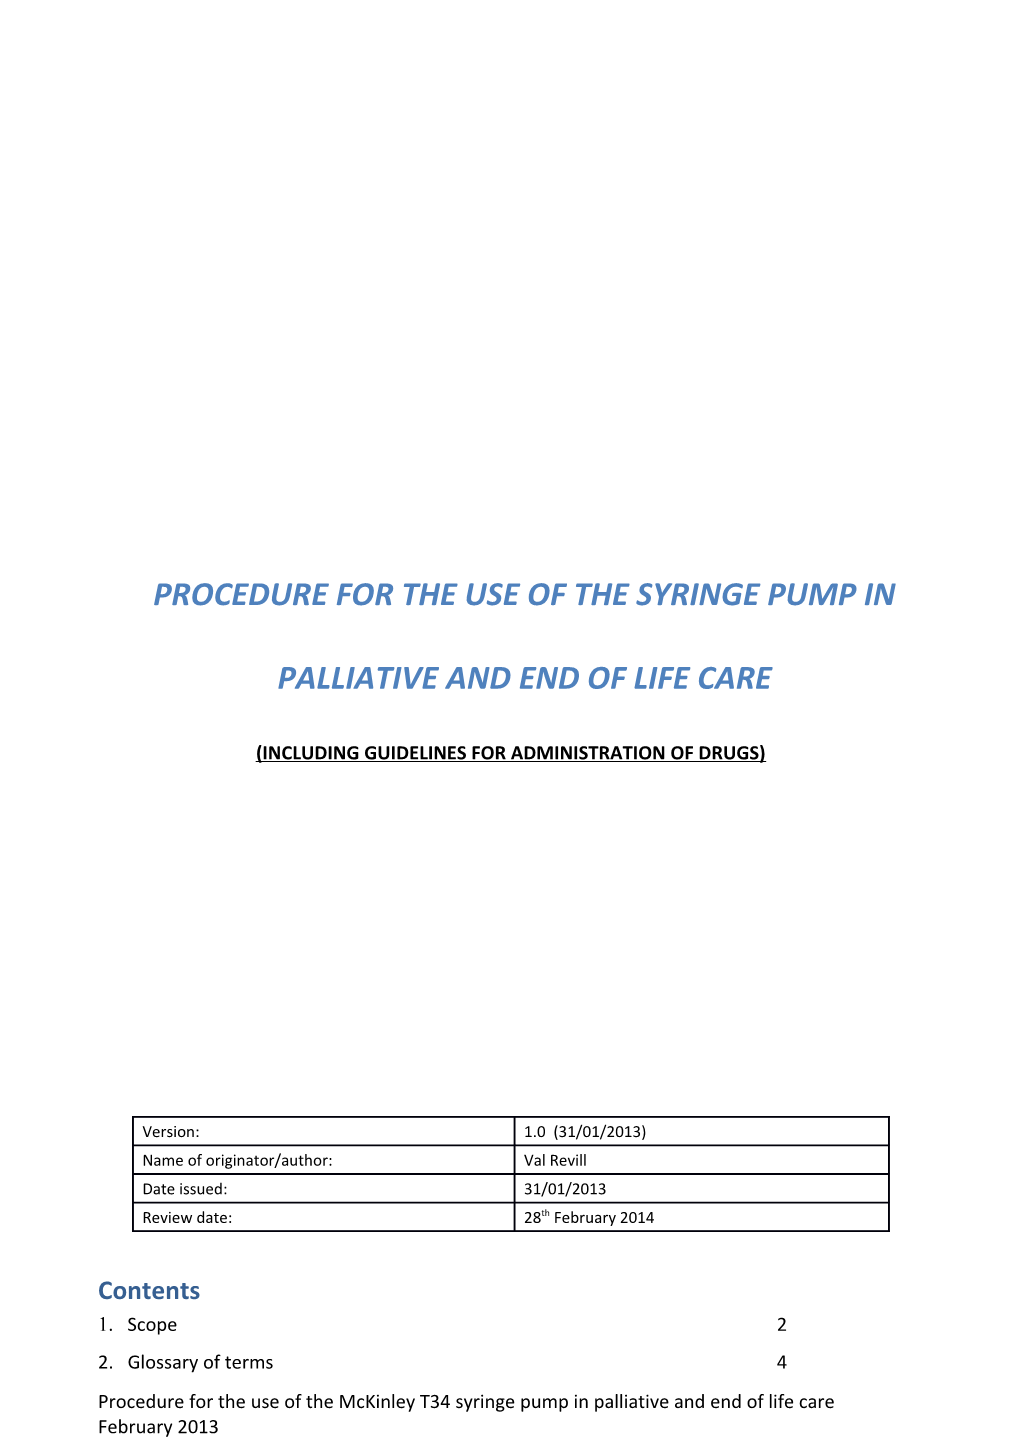 Procedure for the Use of the Syringe Driver in Palliative and End of Life Care